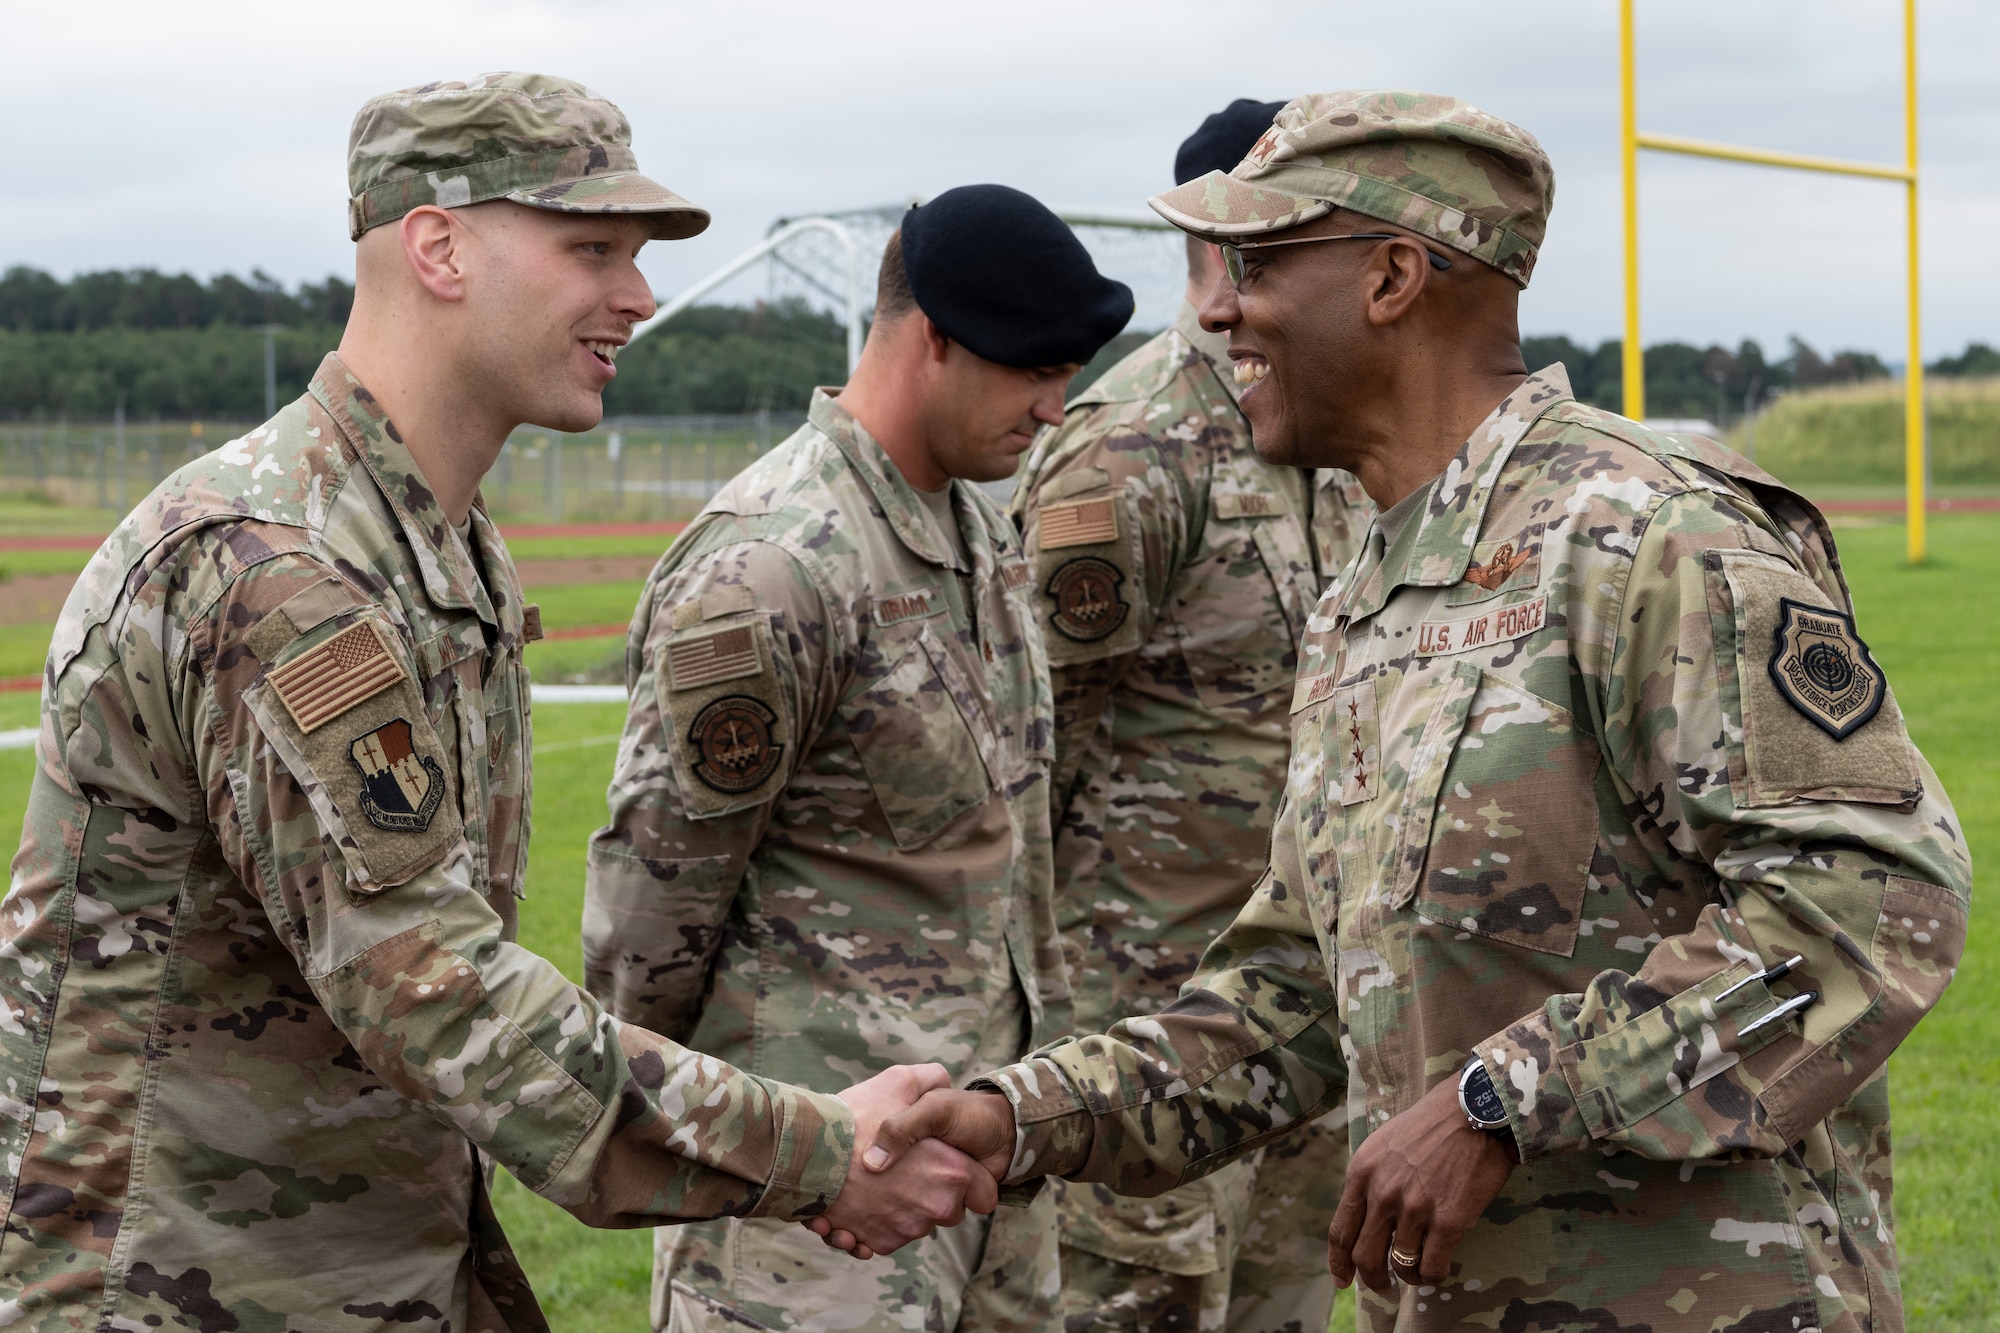 U.S. Air Force Chief of Staff Gen. CQ Brown Jr. (right) presents a challenge coin to U.S. Air Force Tech. Sgt. Kyle Weik, 52nd Munitions Maintenance Group chief inspector of quality assurance, July 16, 2021, on Spangdahlem Air Base, Germany.